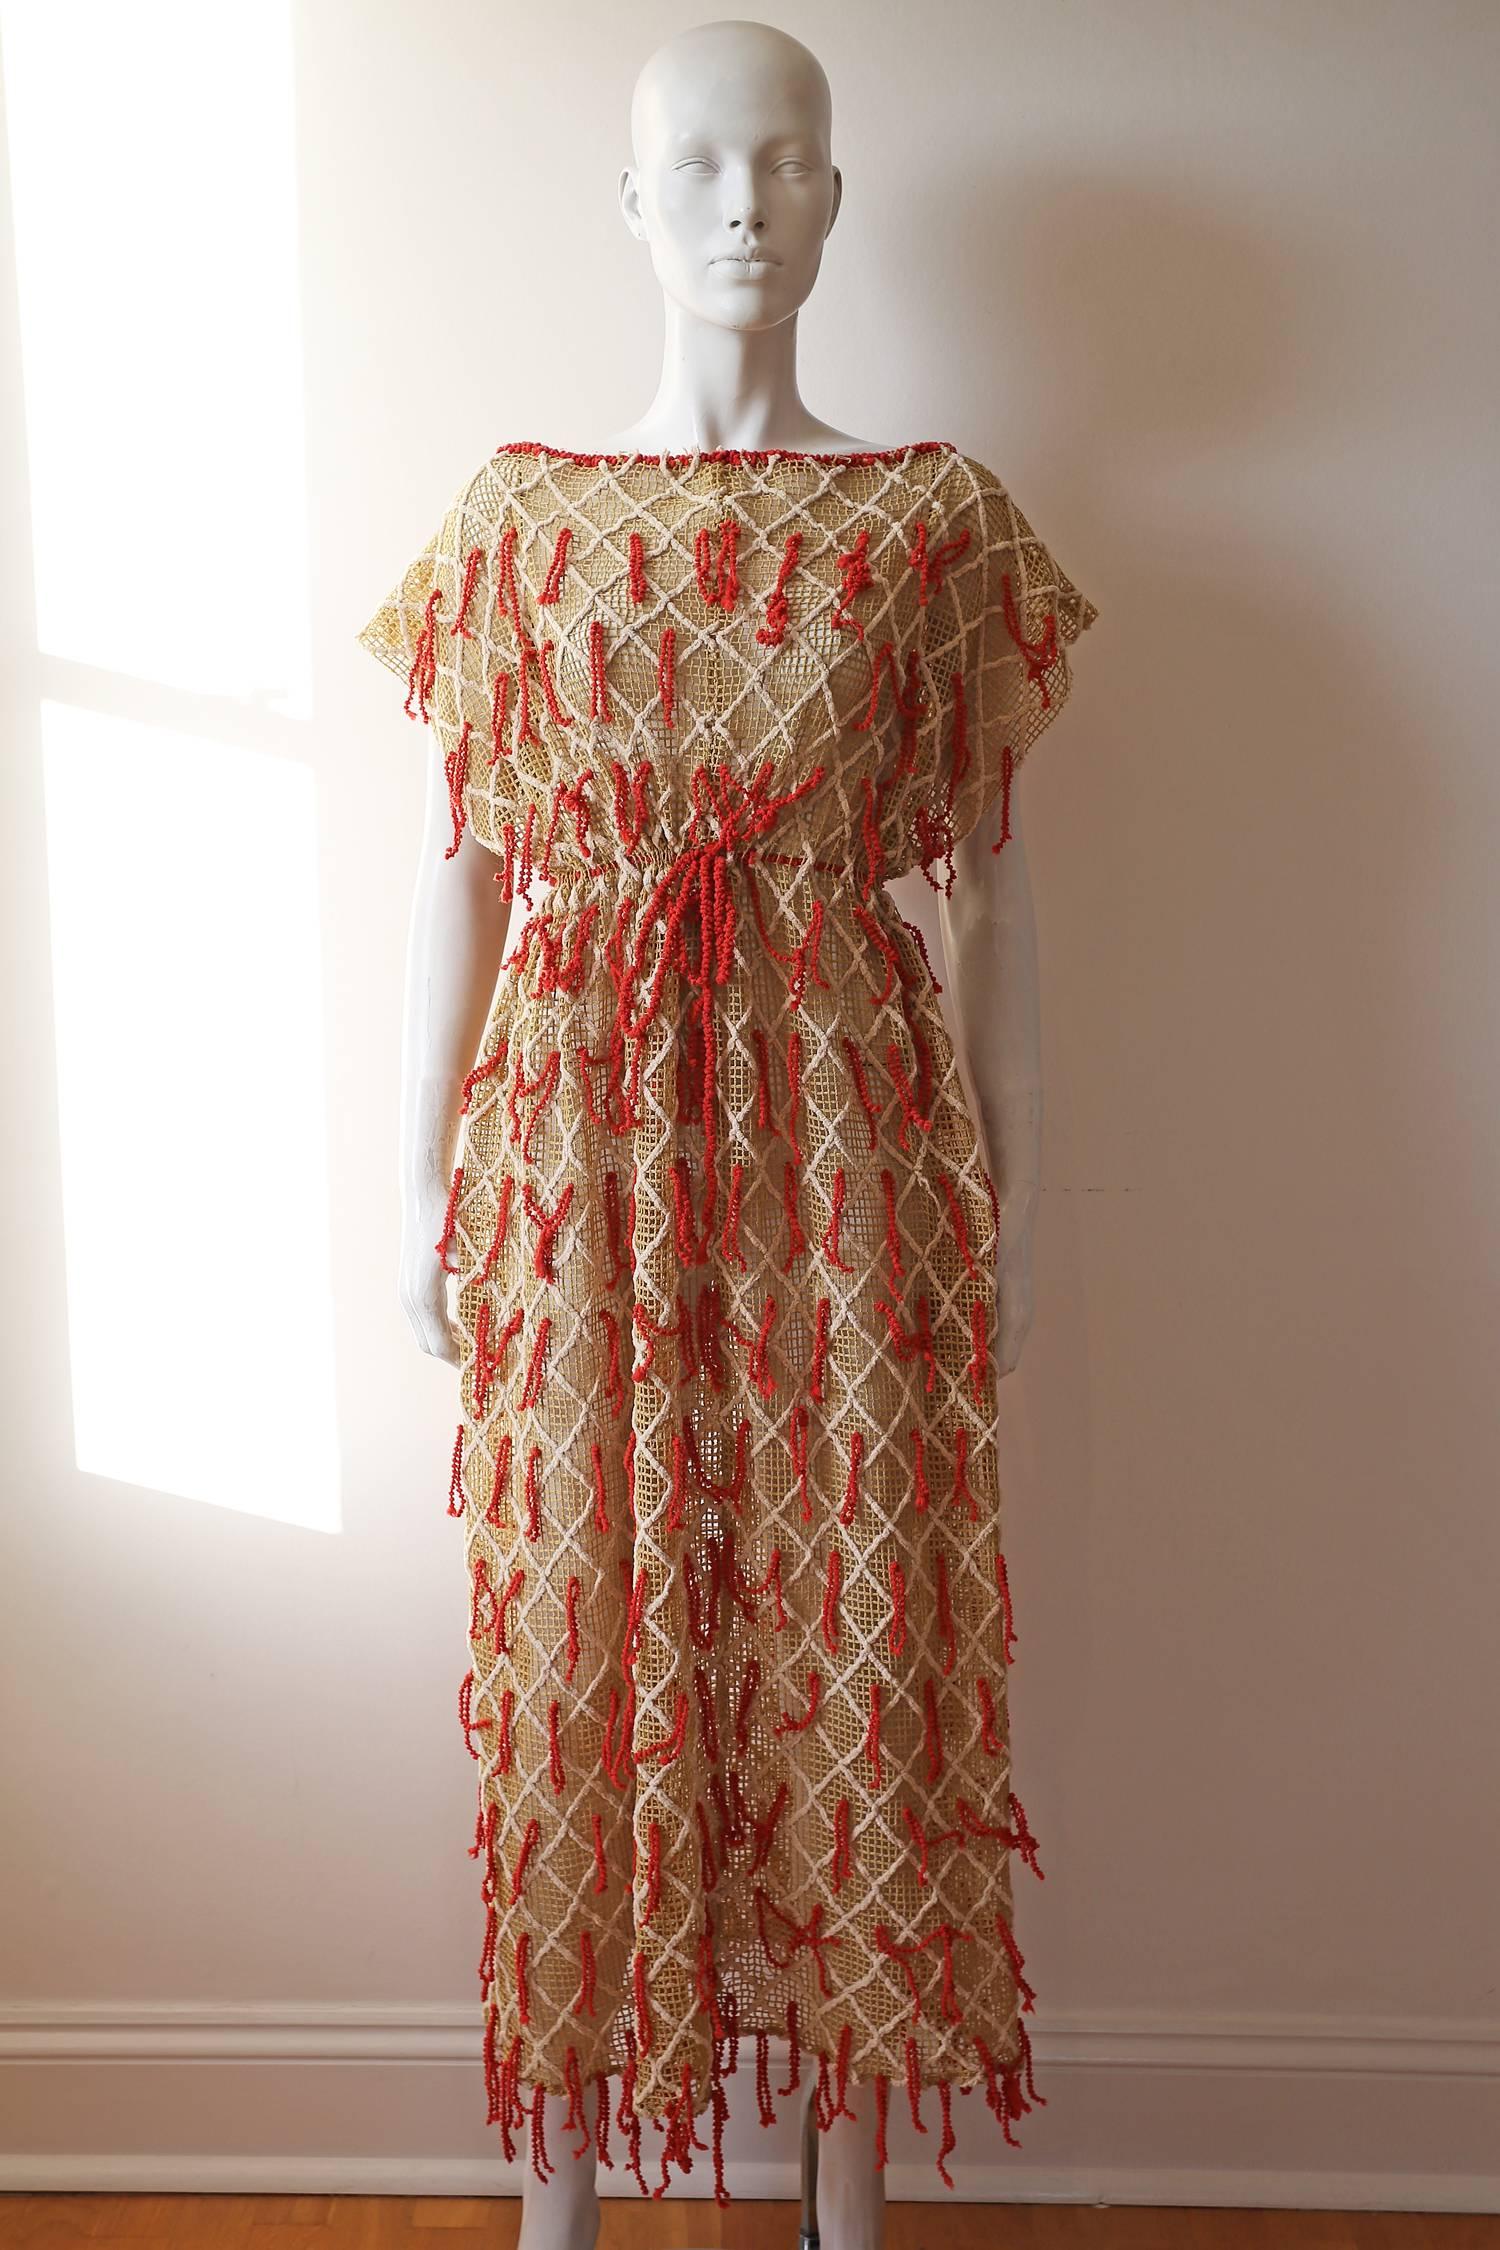 Women's Embroidered netted dress with tassels, c. 1970